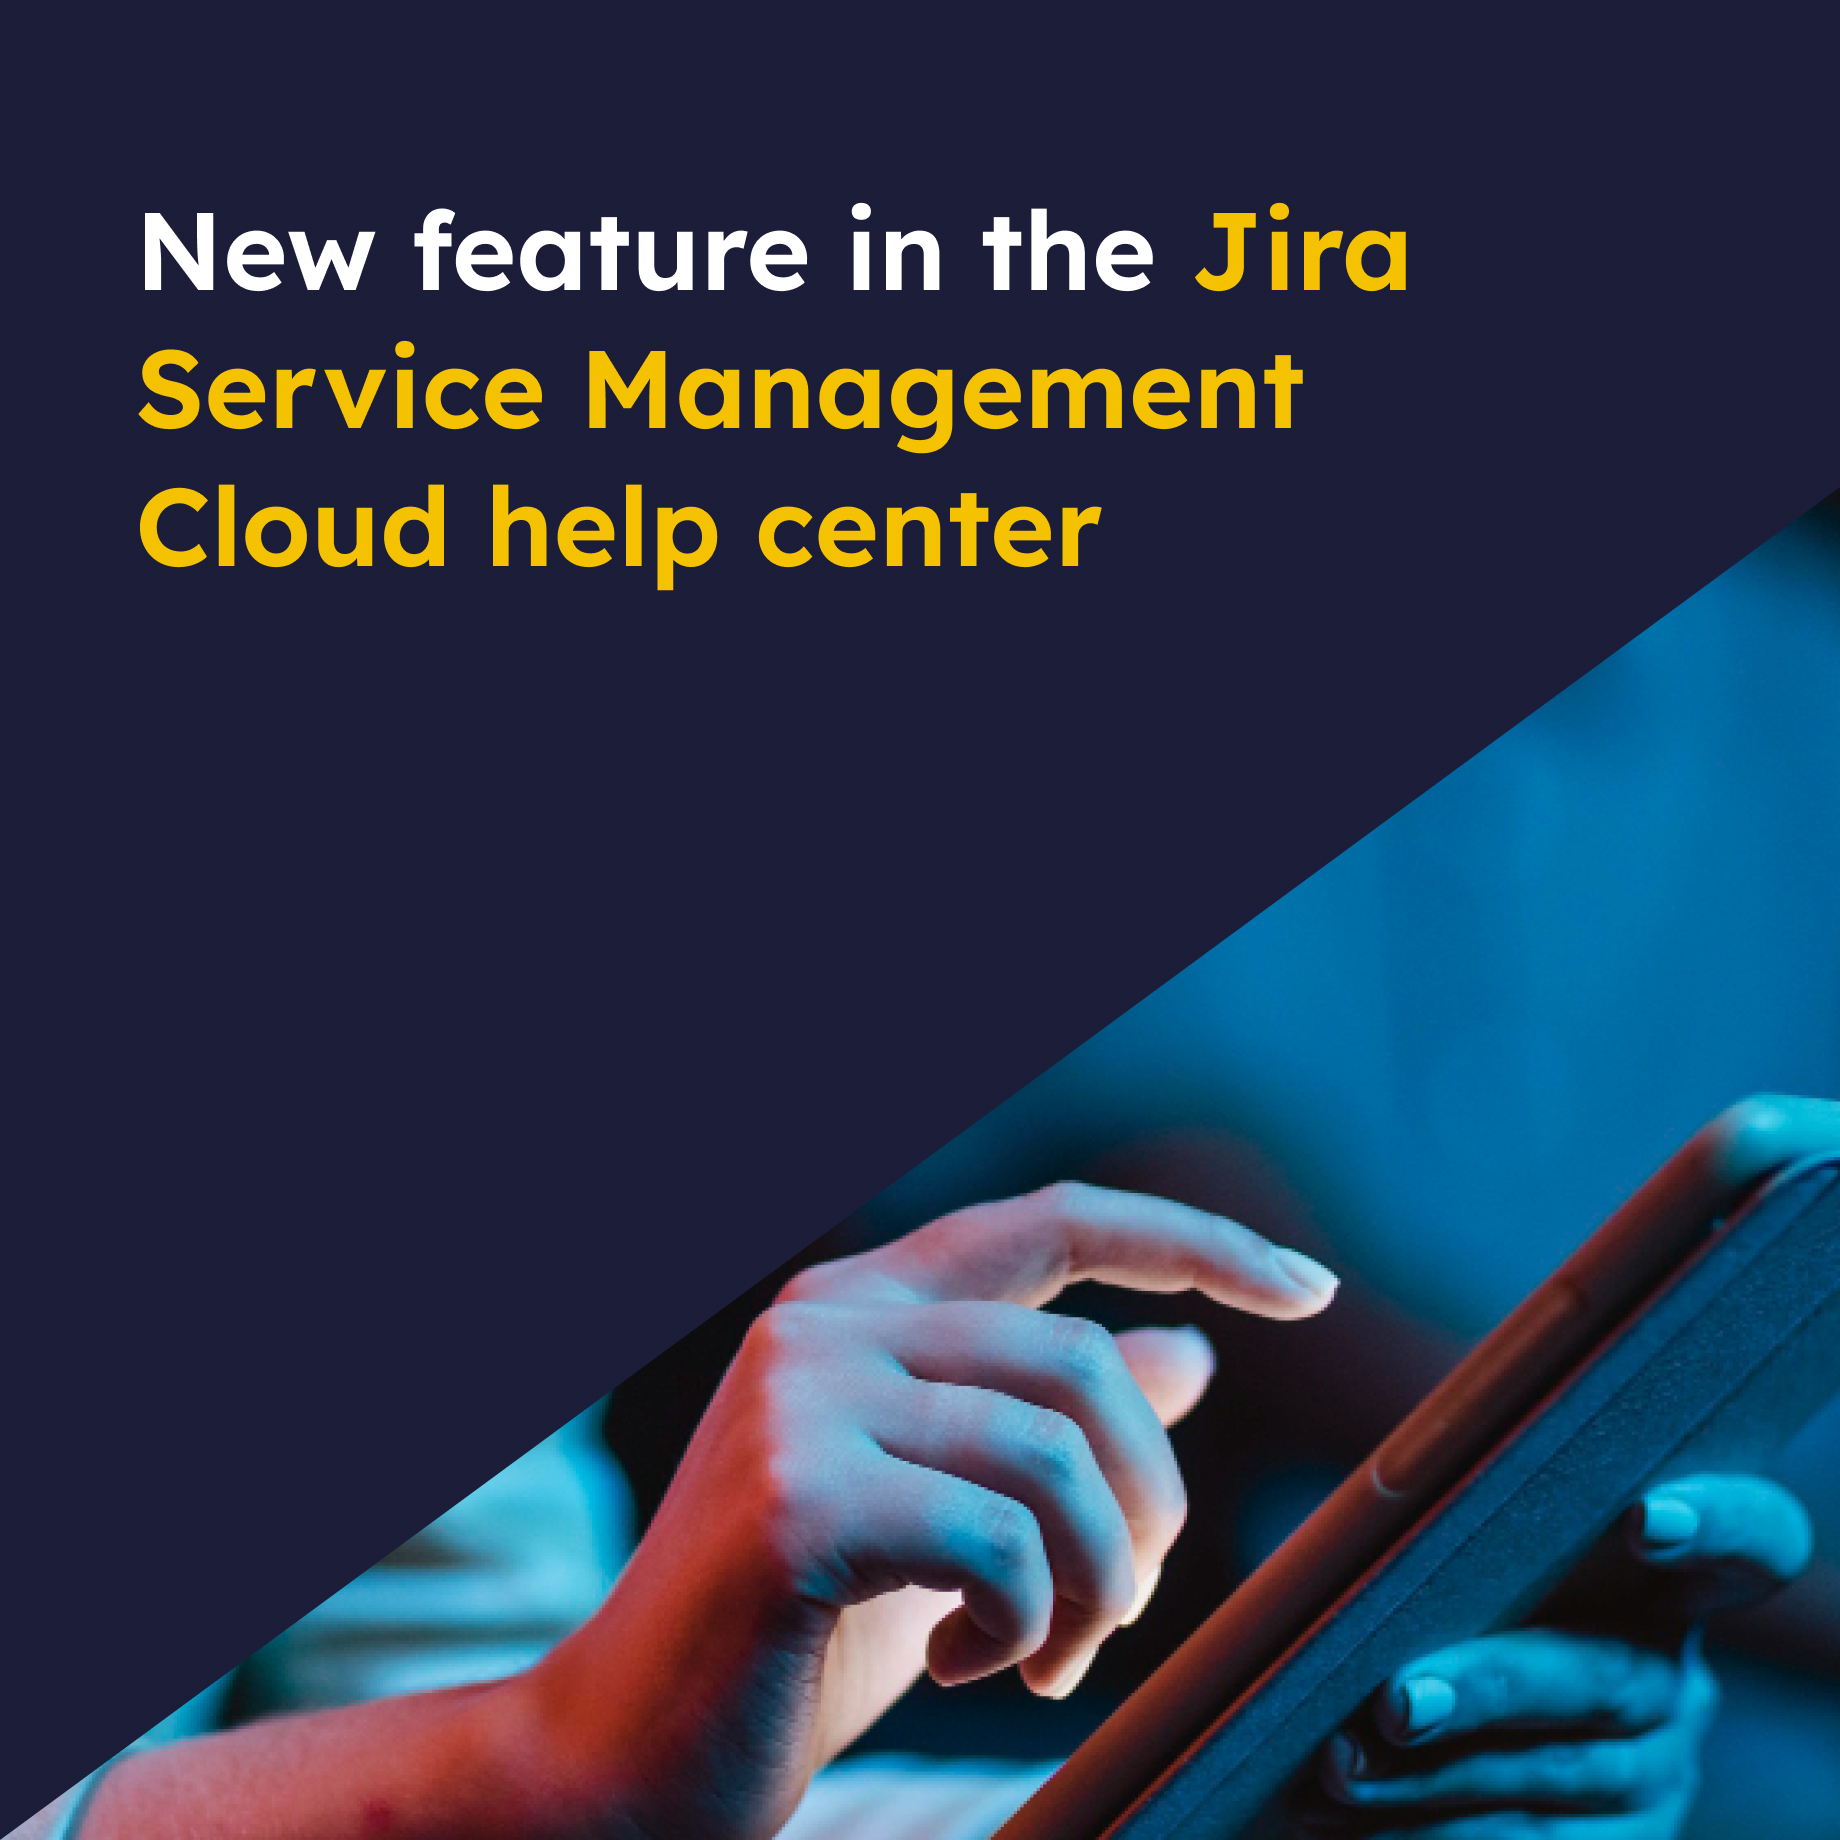 New feature in the Jira Service Management Cloud help center